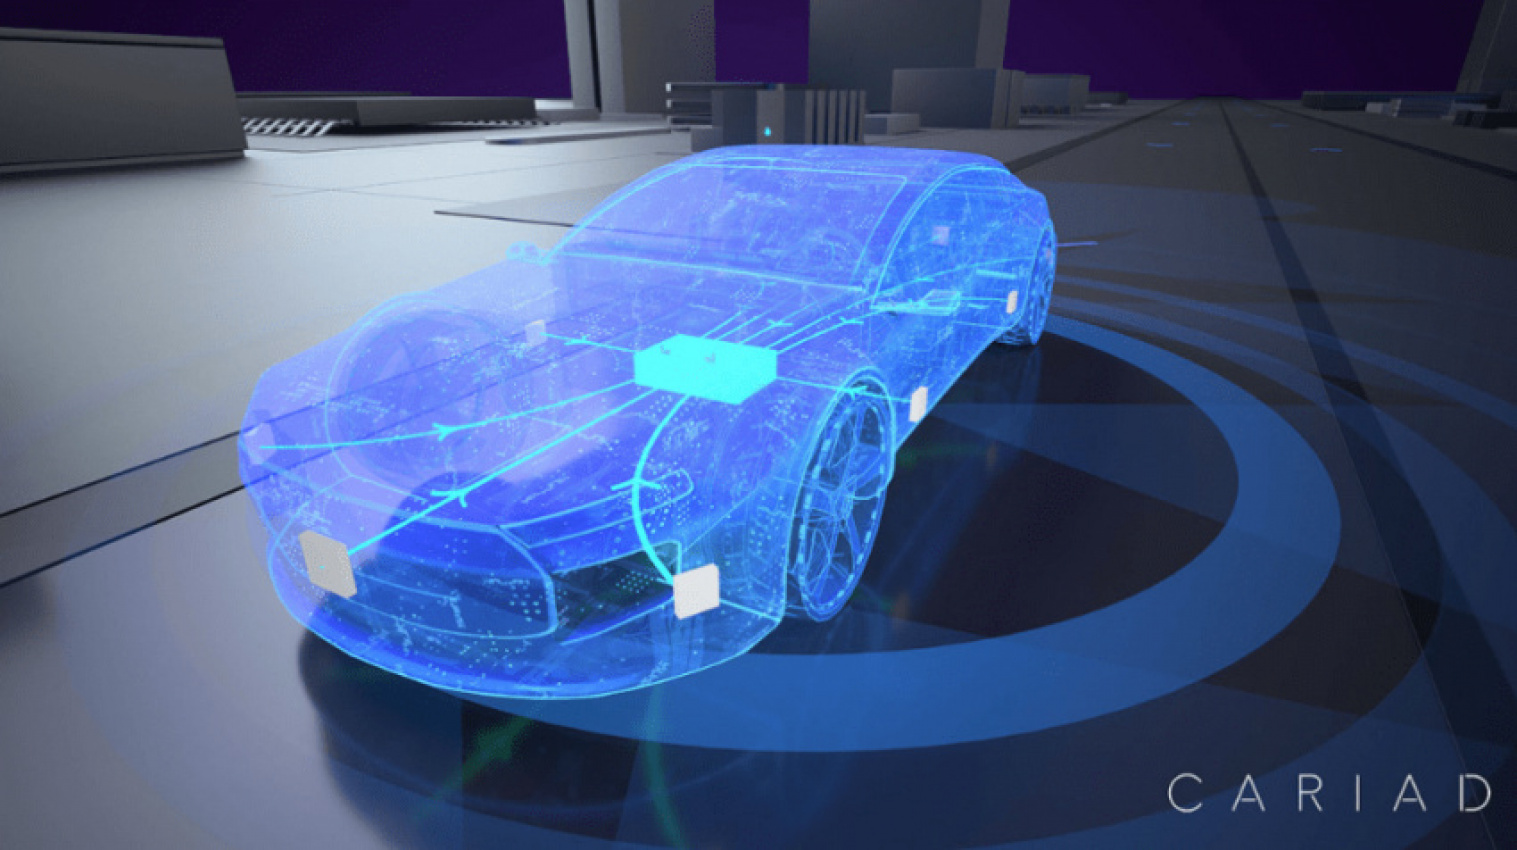 autonomous driving, autos, cars, technology, cariad, dirk hilgenberg, nakul duggal, qualcomm technologies, vw’s cariad selects qualcomm to supply chips for automated driving platform